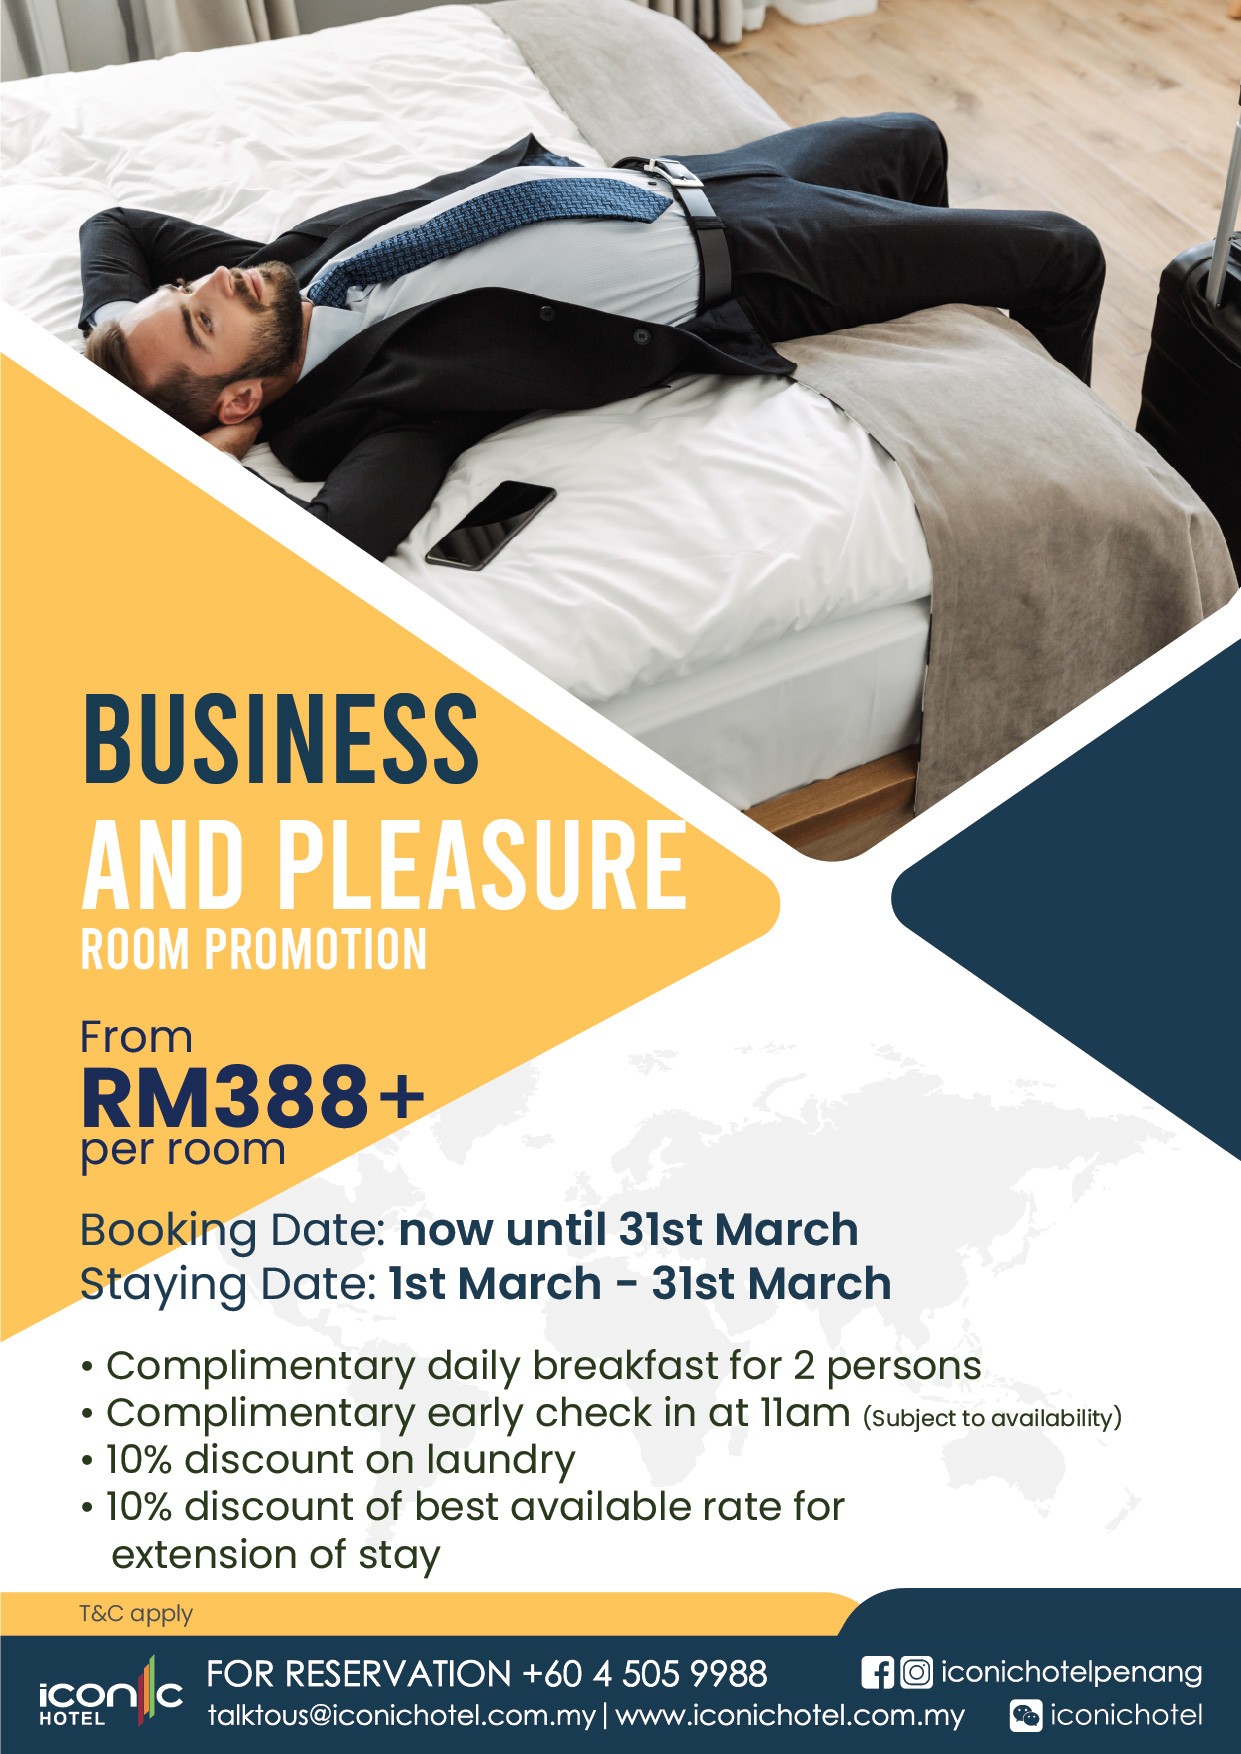 Business and Pleasure by Iconic Hotel